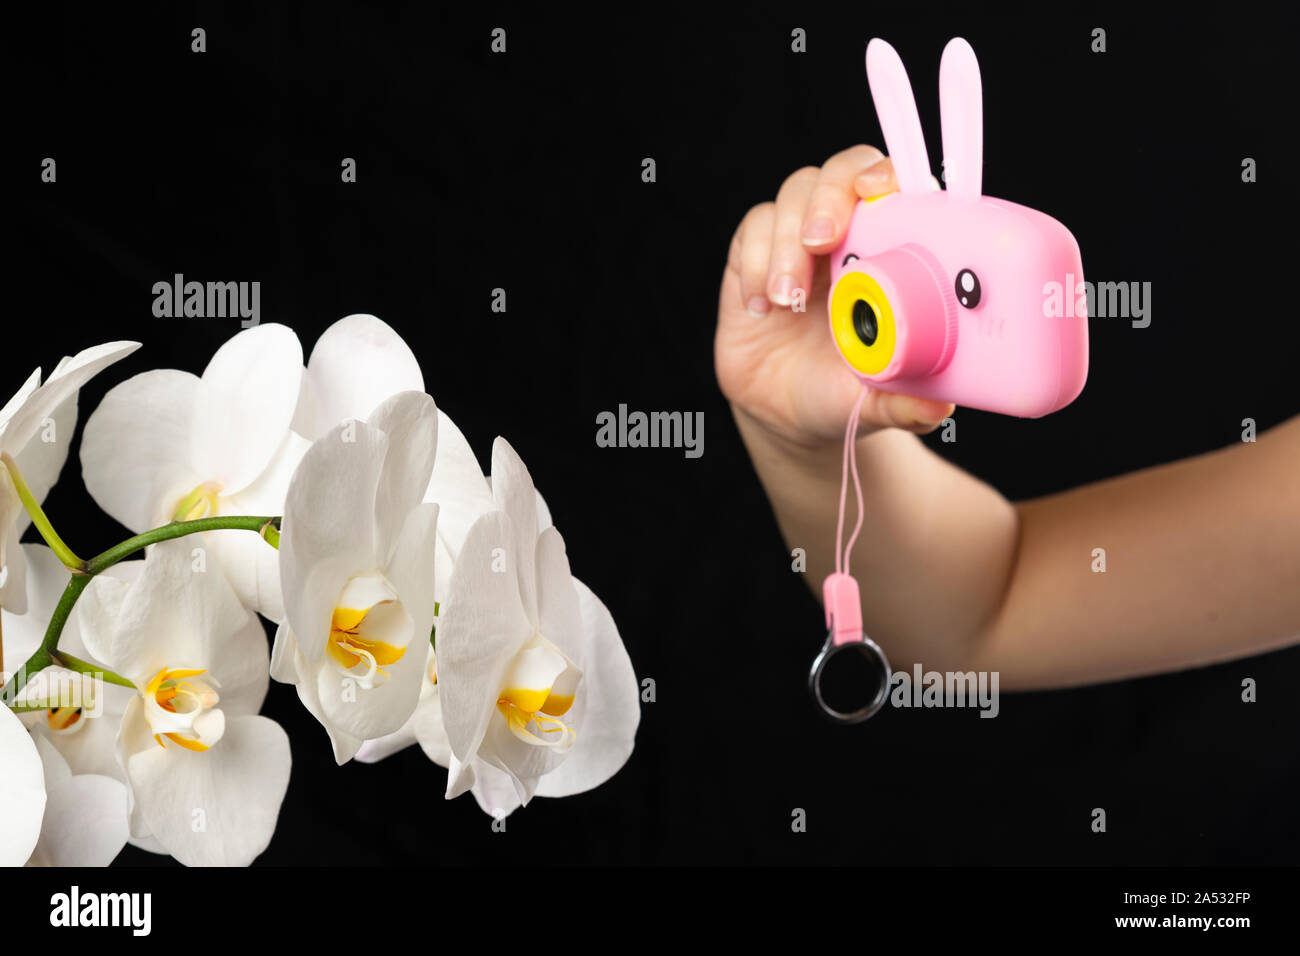 Children s hand holds a pink camera and photographs a white orchid flower on a black background Stock Photo